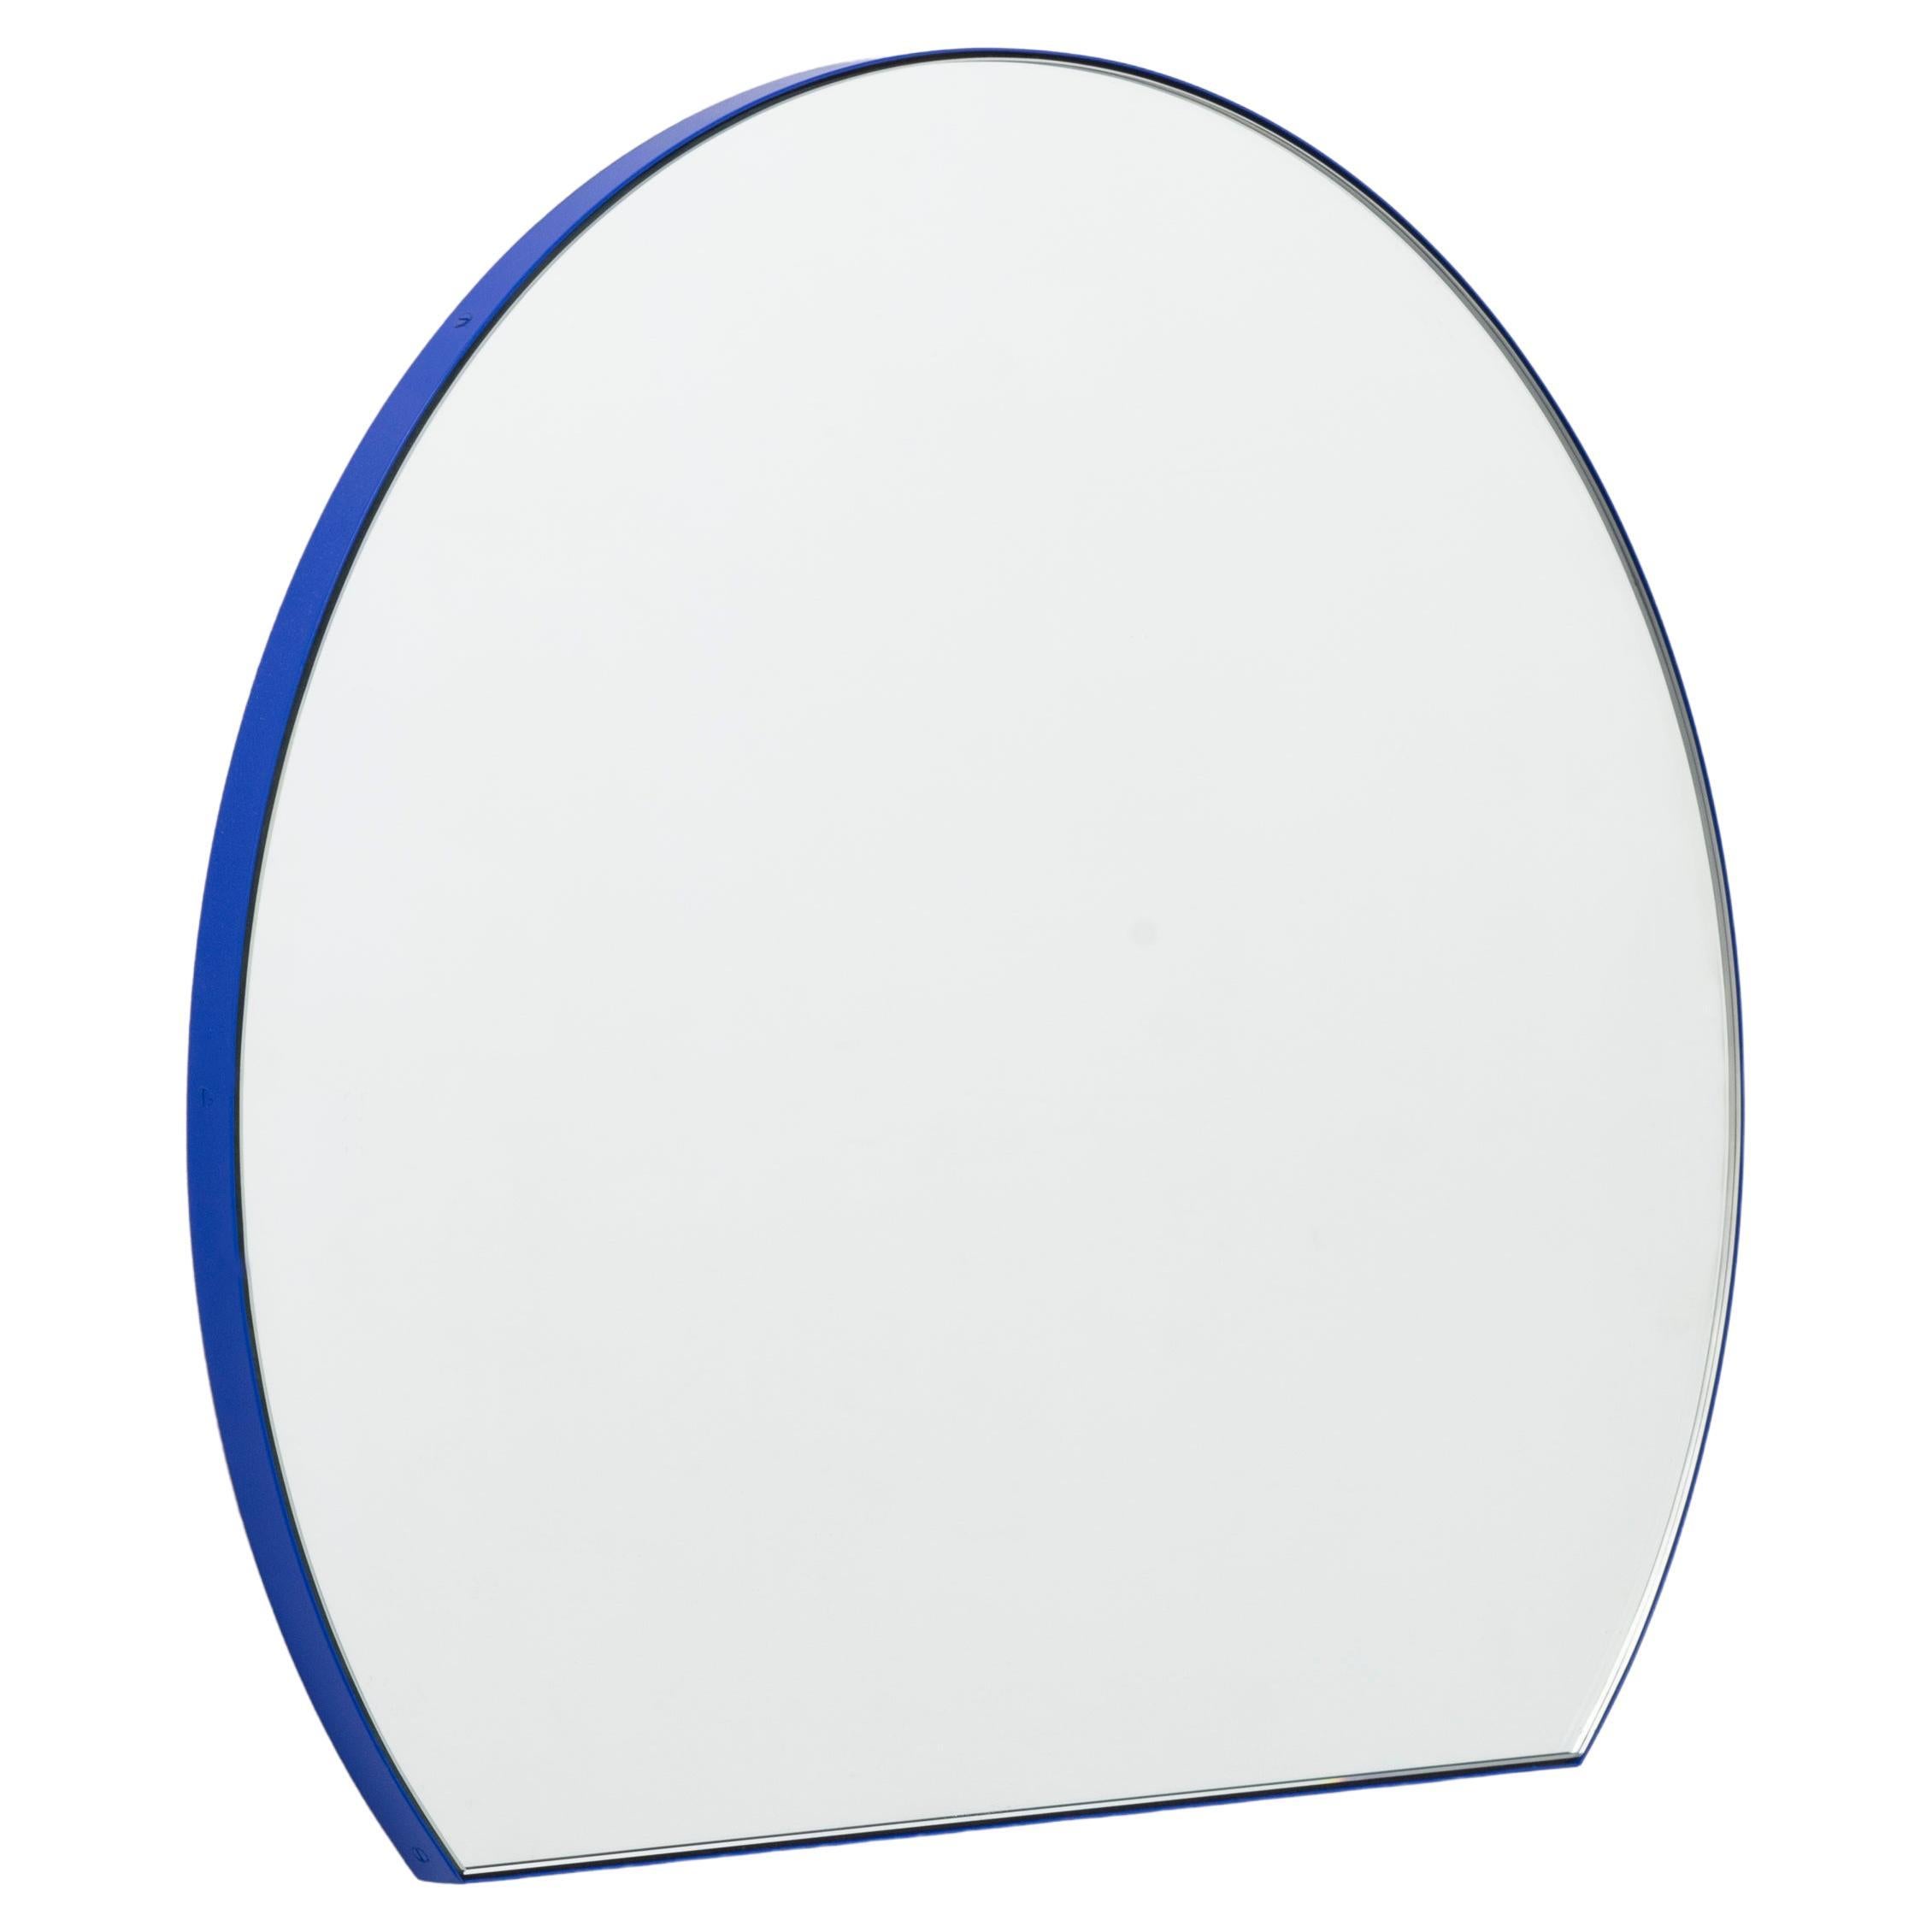 Orbis Trecus Cropped Round Modern Mirror with Blue Frame, Large For Sale